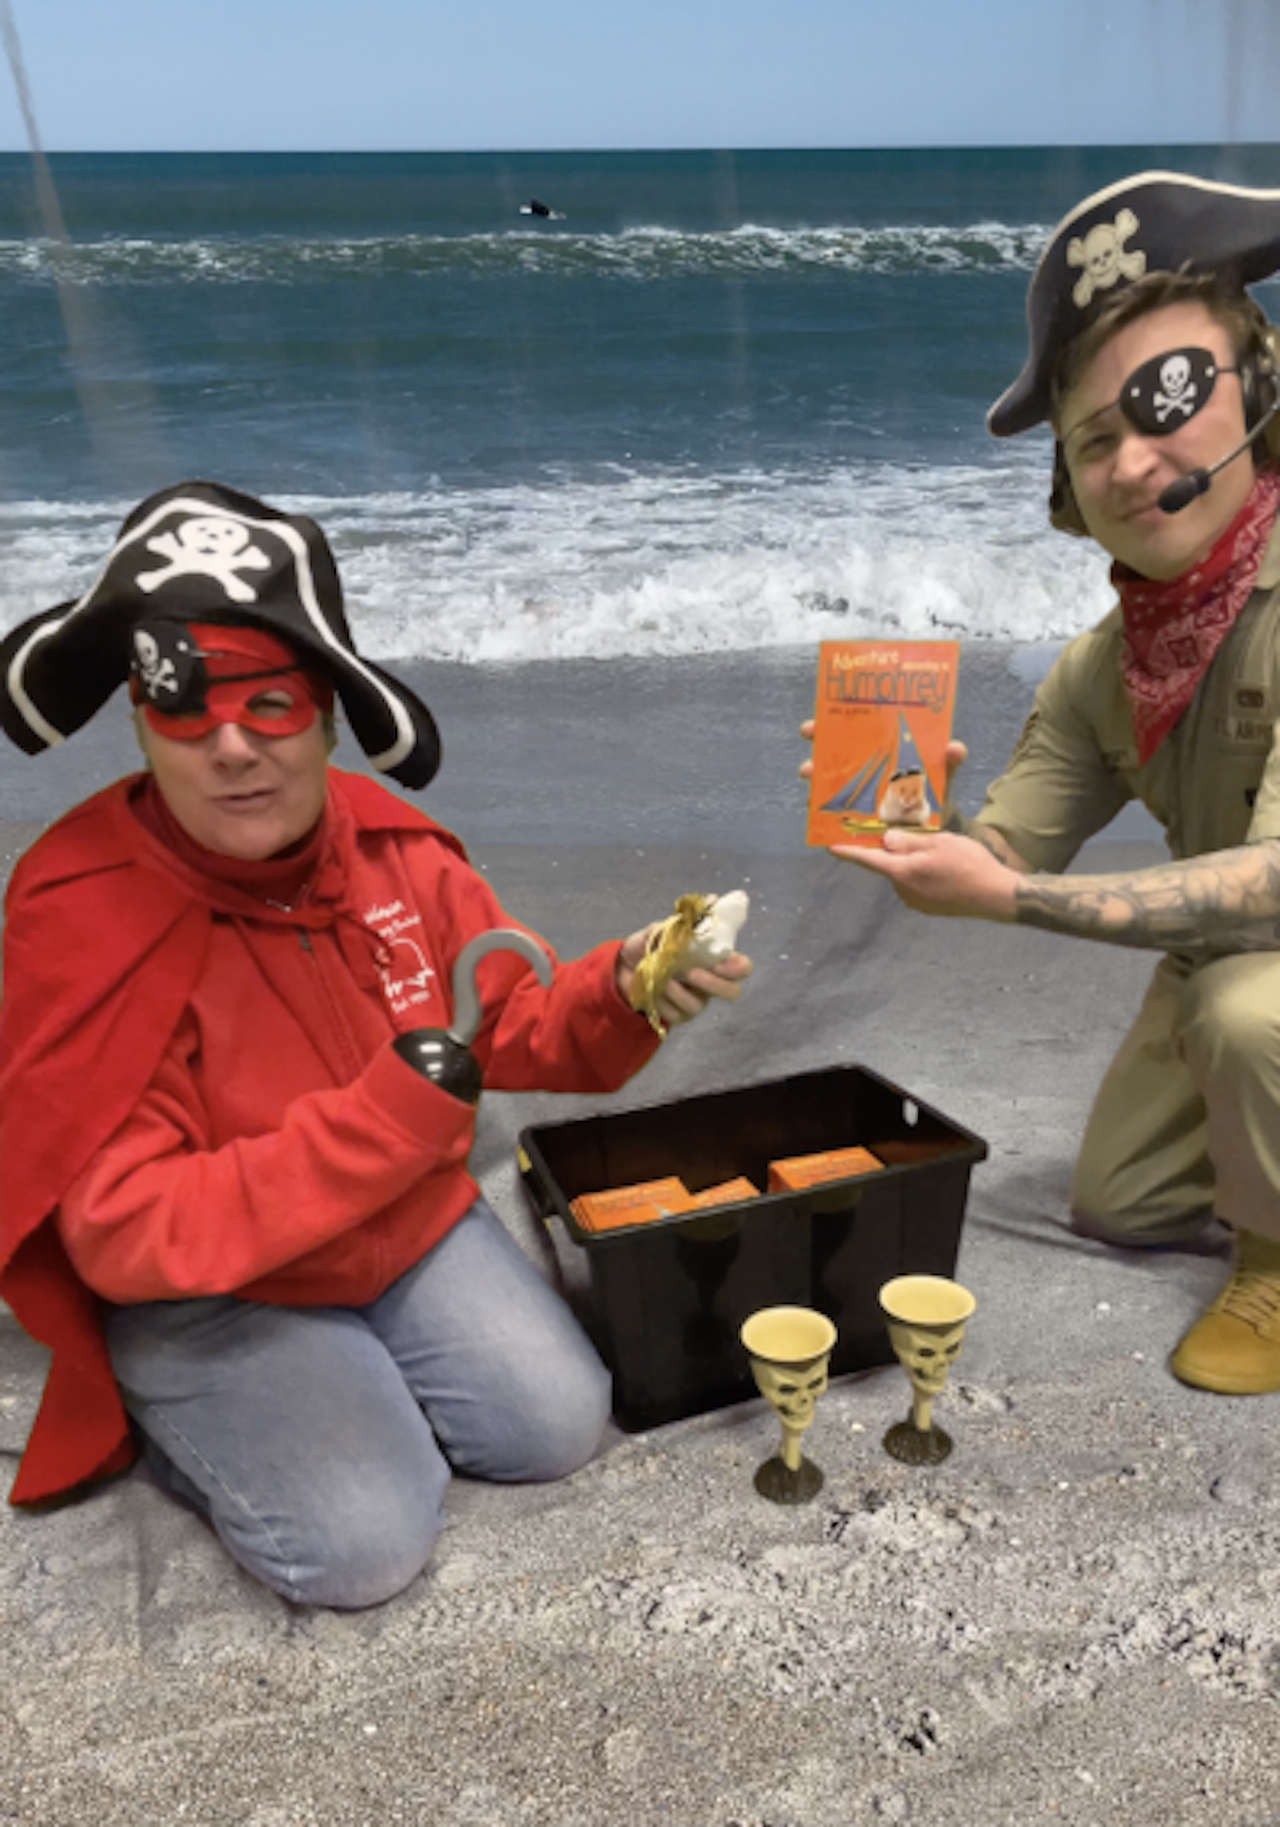 Treasure chest with pirates holding the book: Adventure According to Humphrey